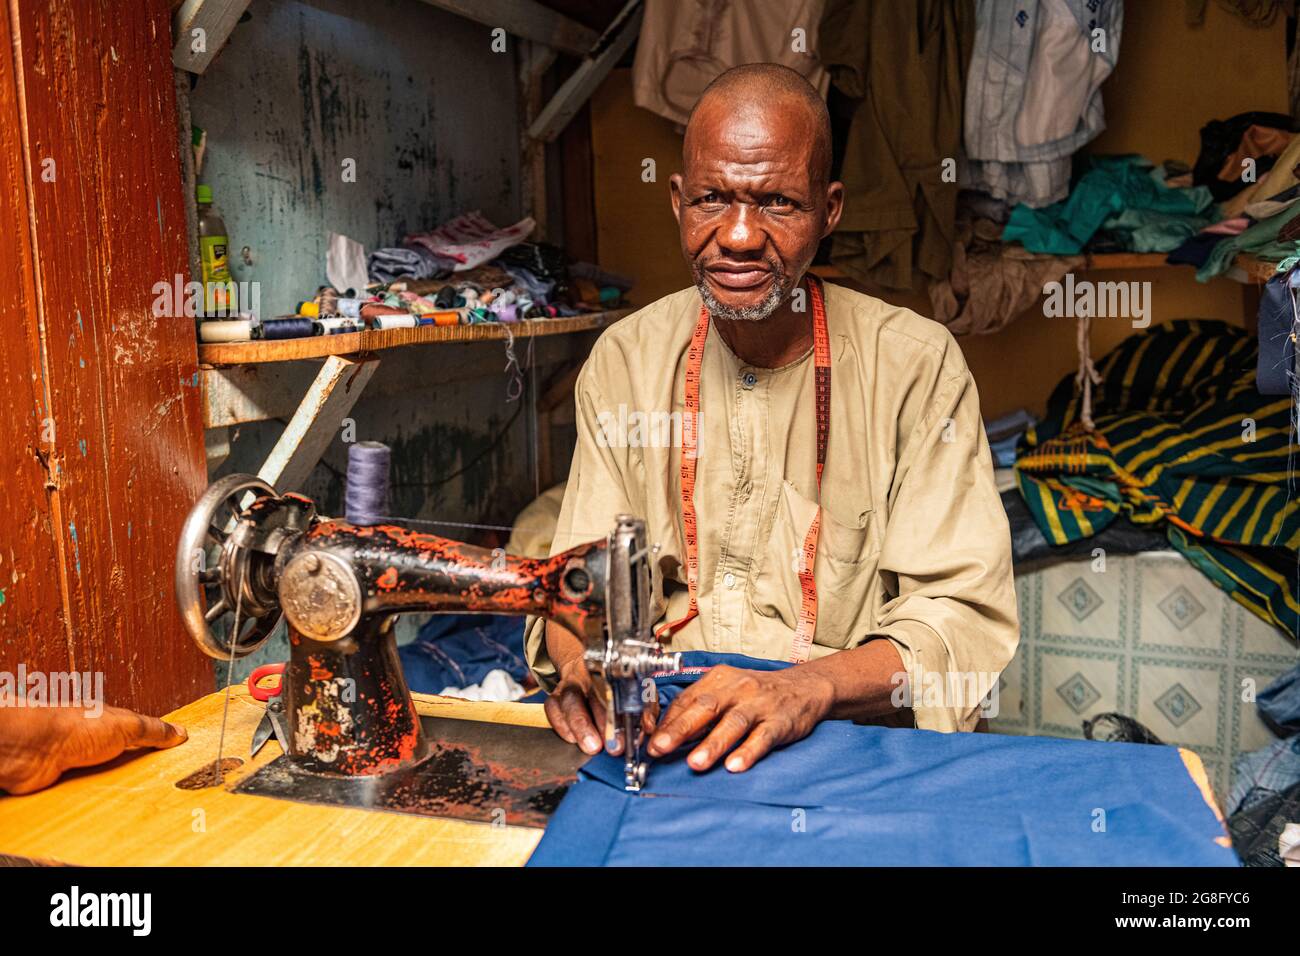 Tailor in Kano, Kano state, Nigeria, West Africa, Africa Stock Photo